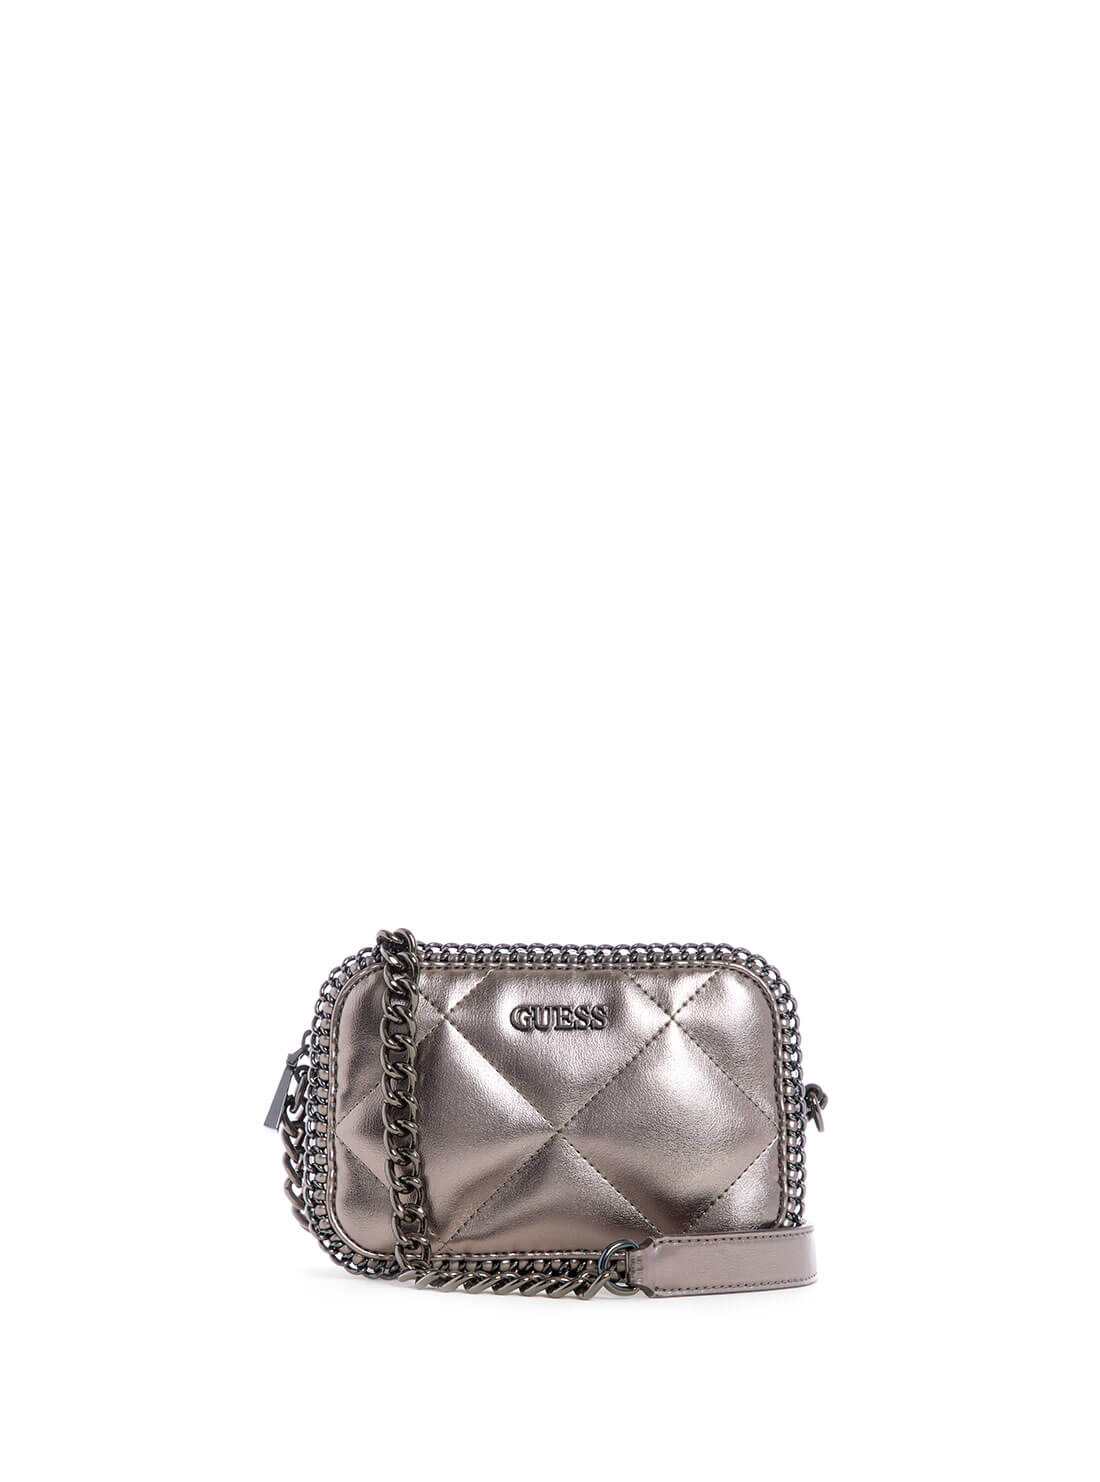 GUESS Womens  Metalic Pewter Quilted Khatia Crossbody Camera Bag MM838114 Front View